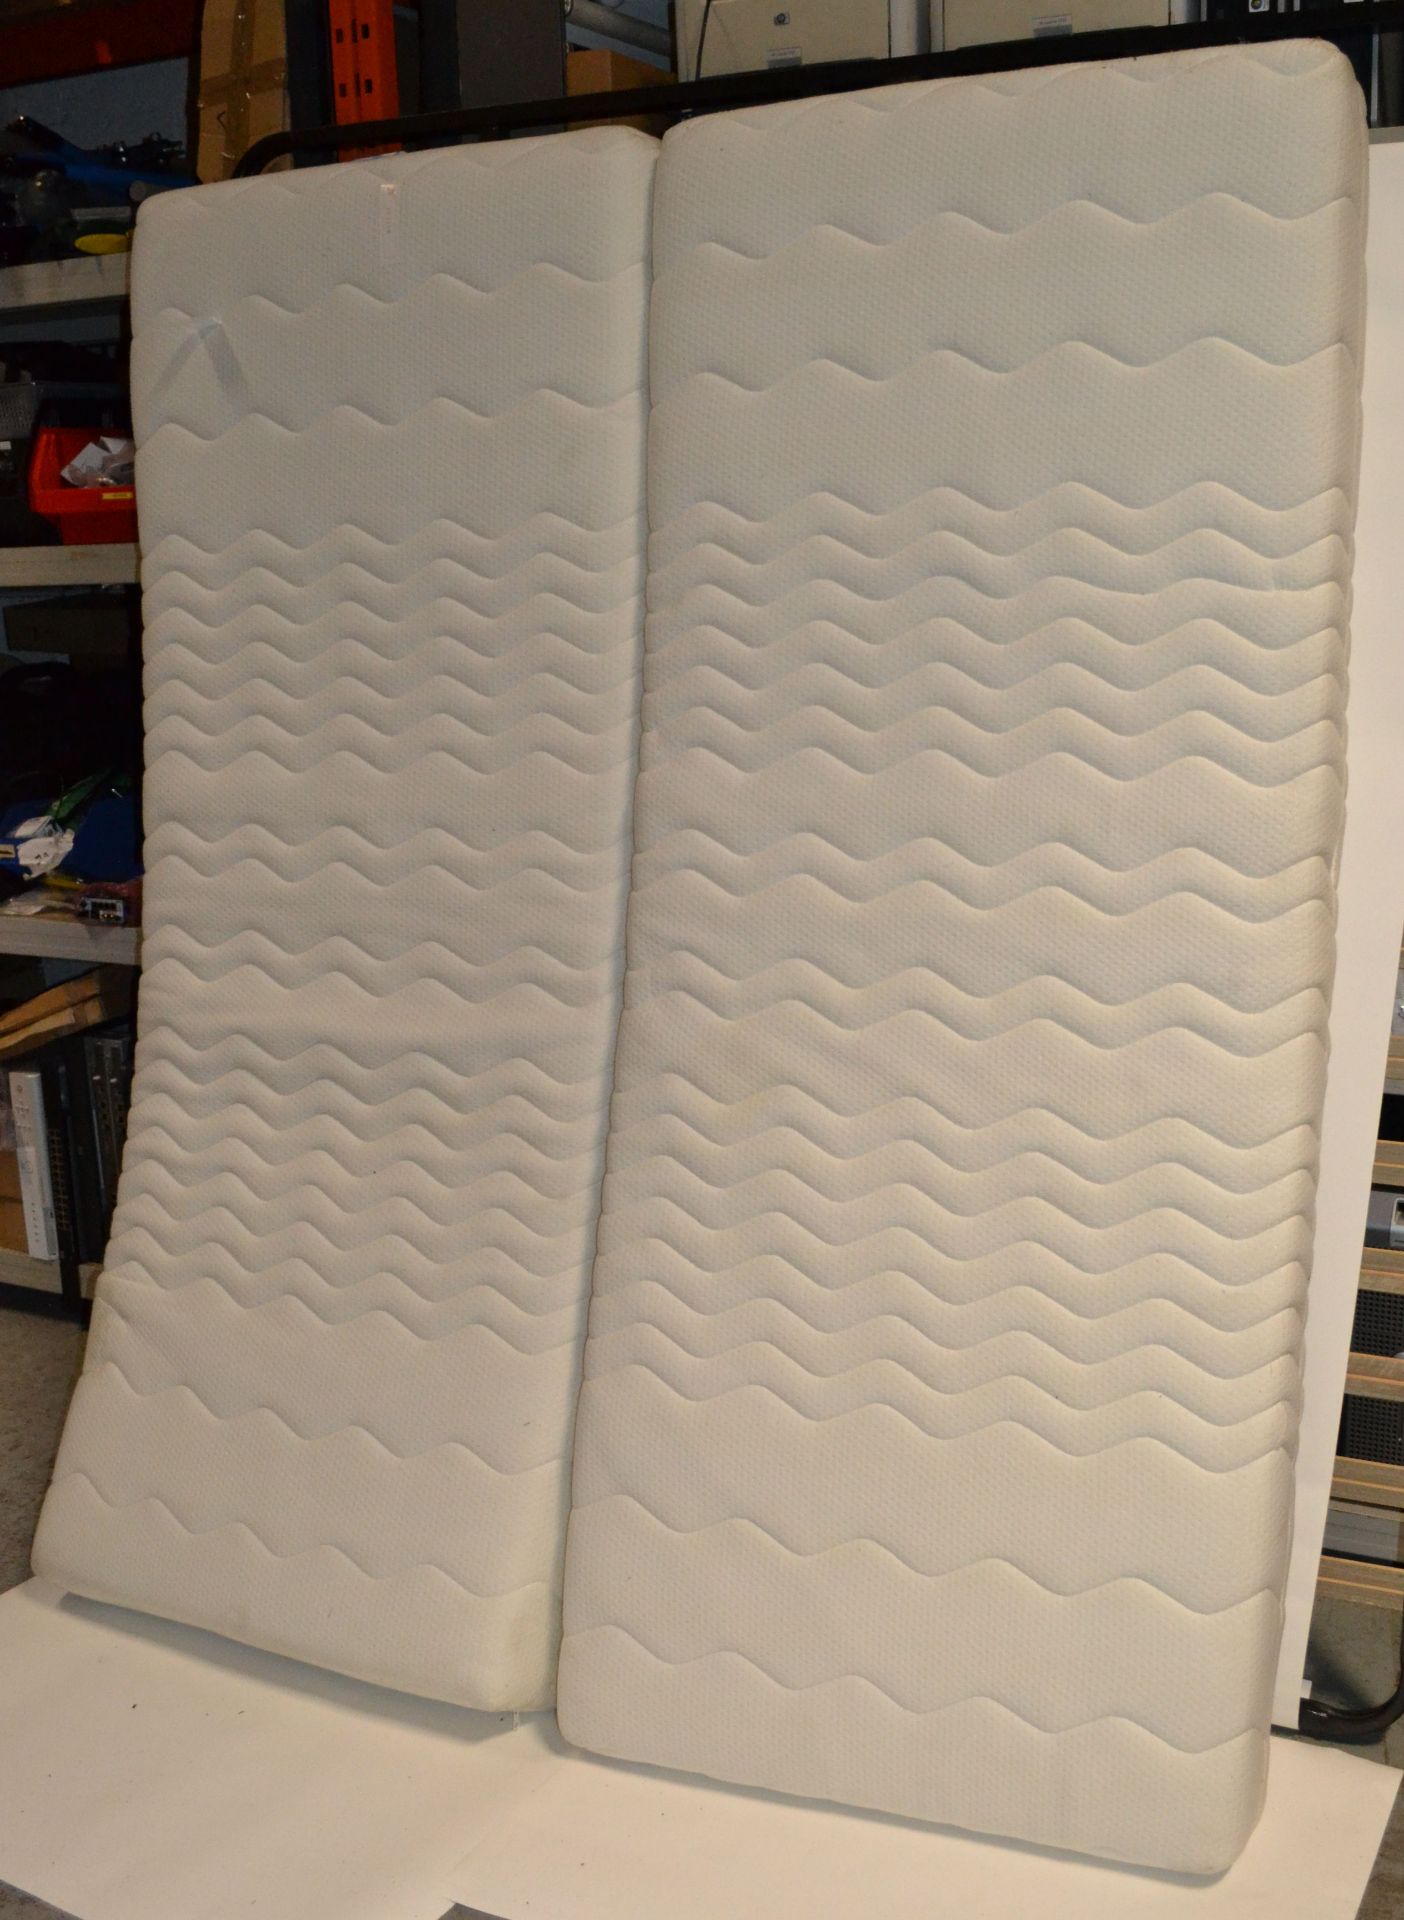 2 x Single Mattresses - Used in Excellent Condition - Dimensions: 200x80cm Each - AE020 - CL007 - Lo - Image 5 of 6